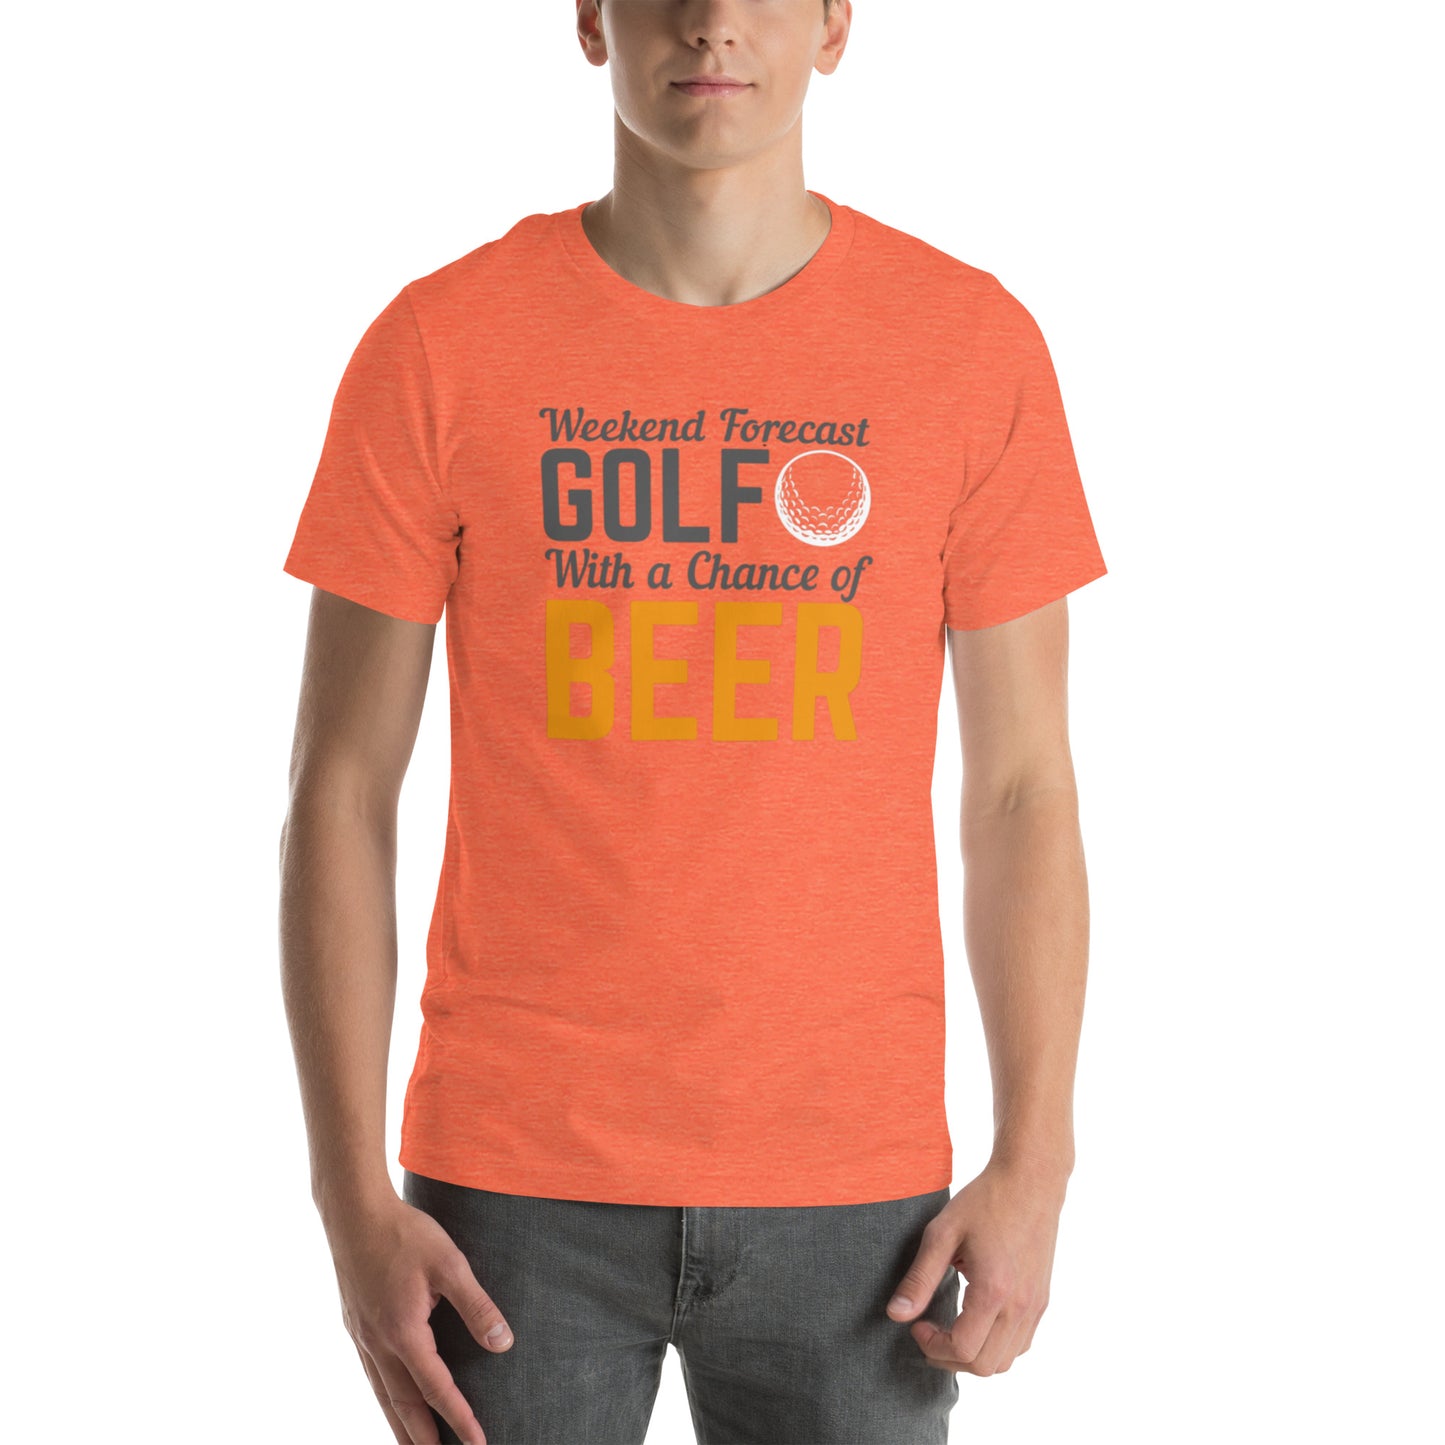 Weekend Forecast Golf With A Chance Of Beer Unisex t-shirt